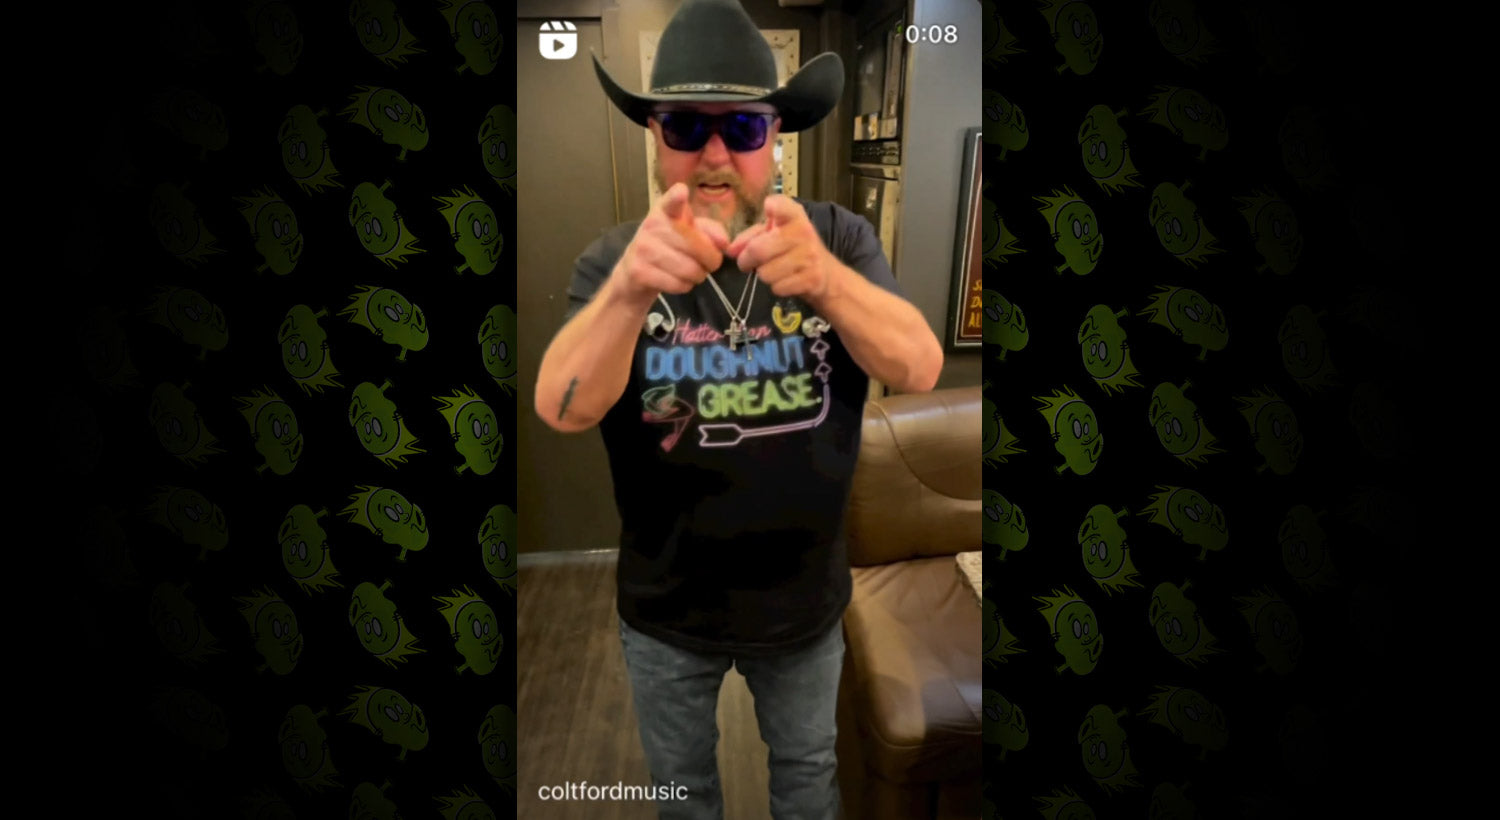 Load video: Country music star Colt Ford rocking the killer &quot;Hotter than Doughnut Grease&quot; t-shirt he designed with SP!TTAKE MERCH around one of his sayings!